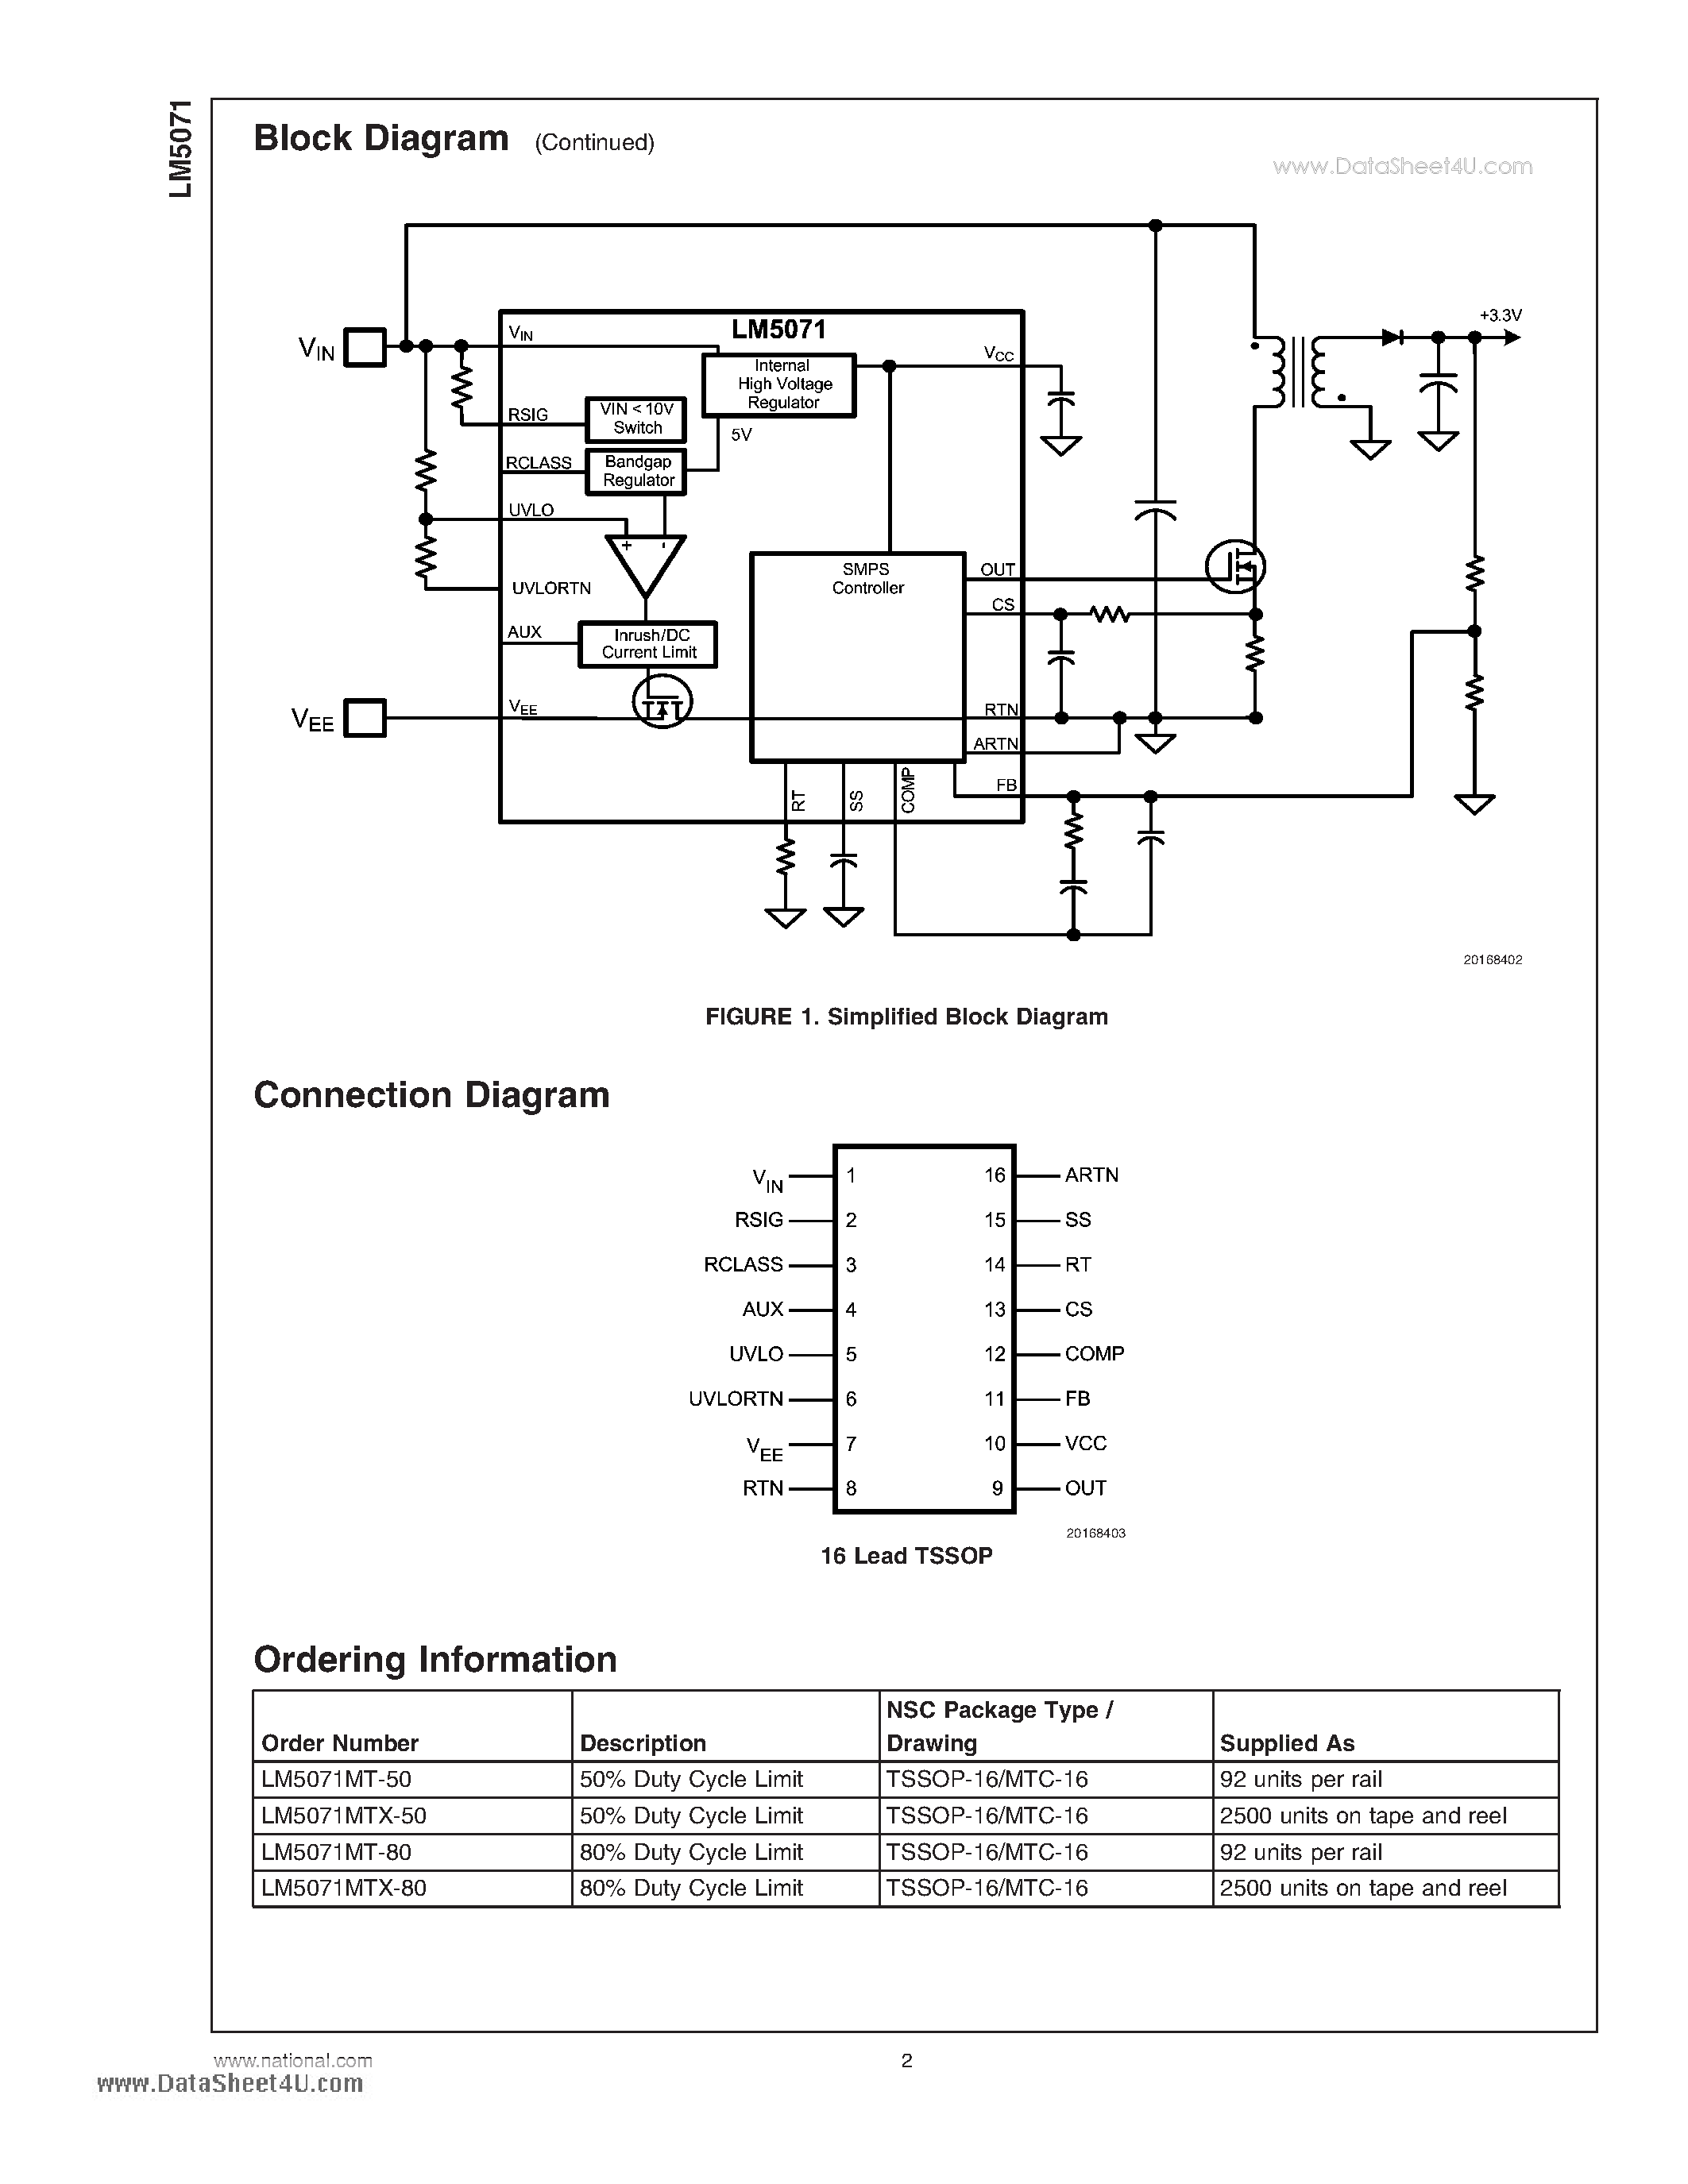 Datasheet 5071MT - Search -----> LM5071MT page 2